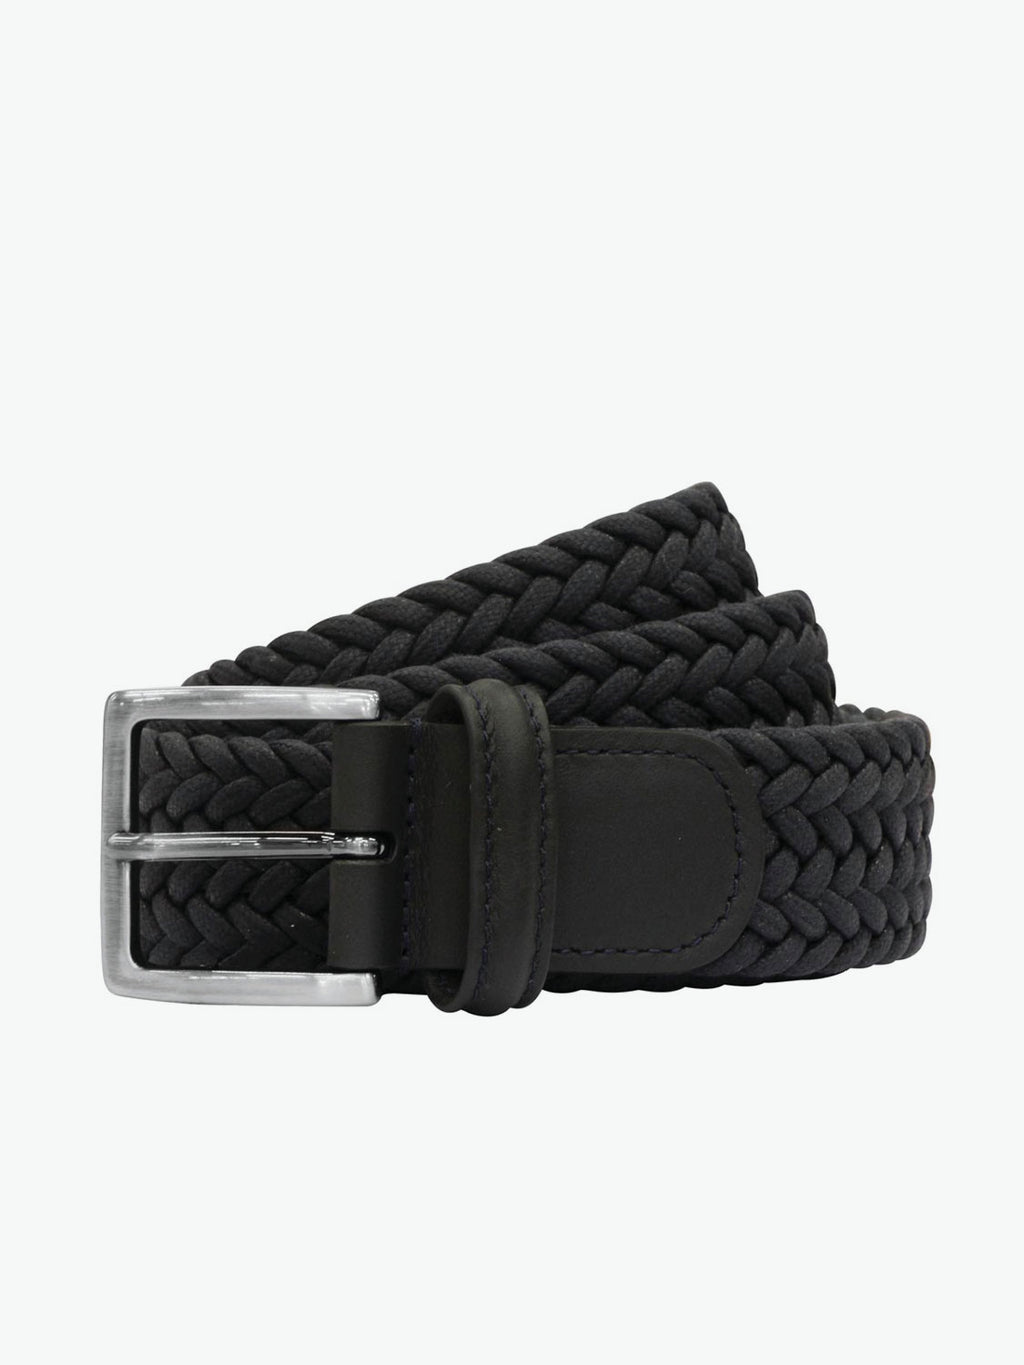 Anderson's Stretch Woven Belt In Navy Mix